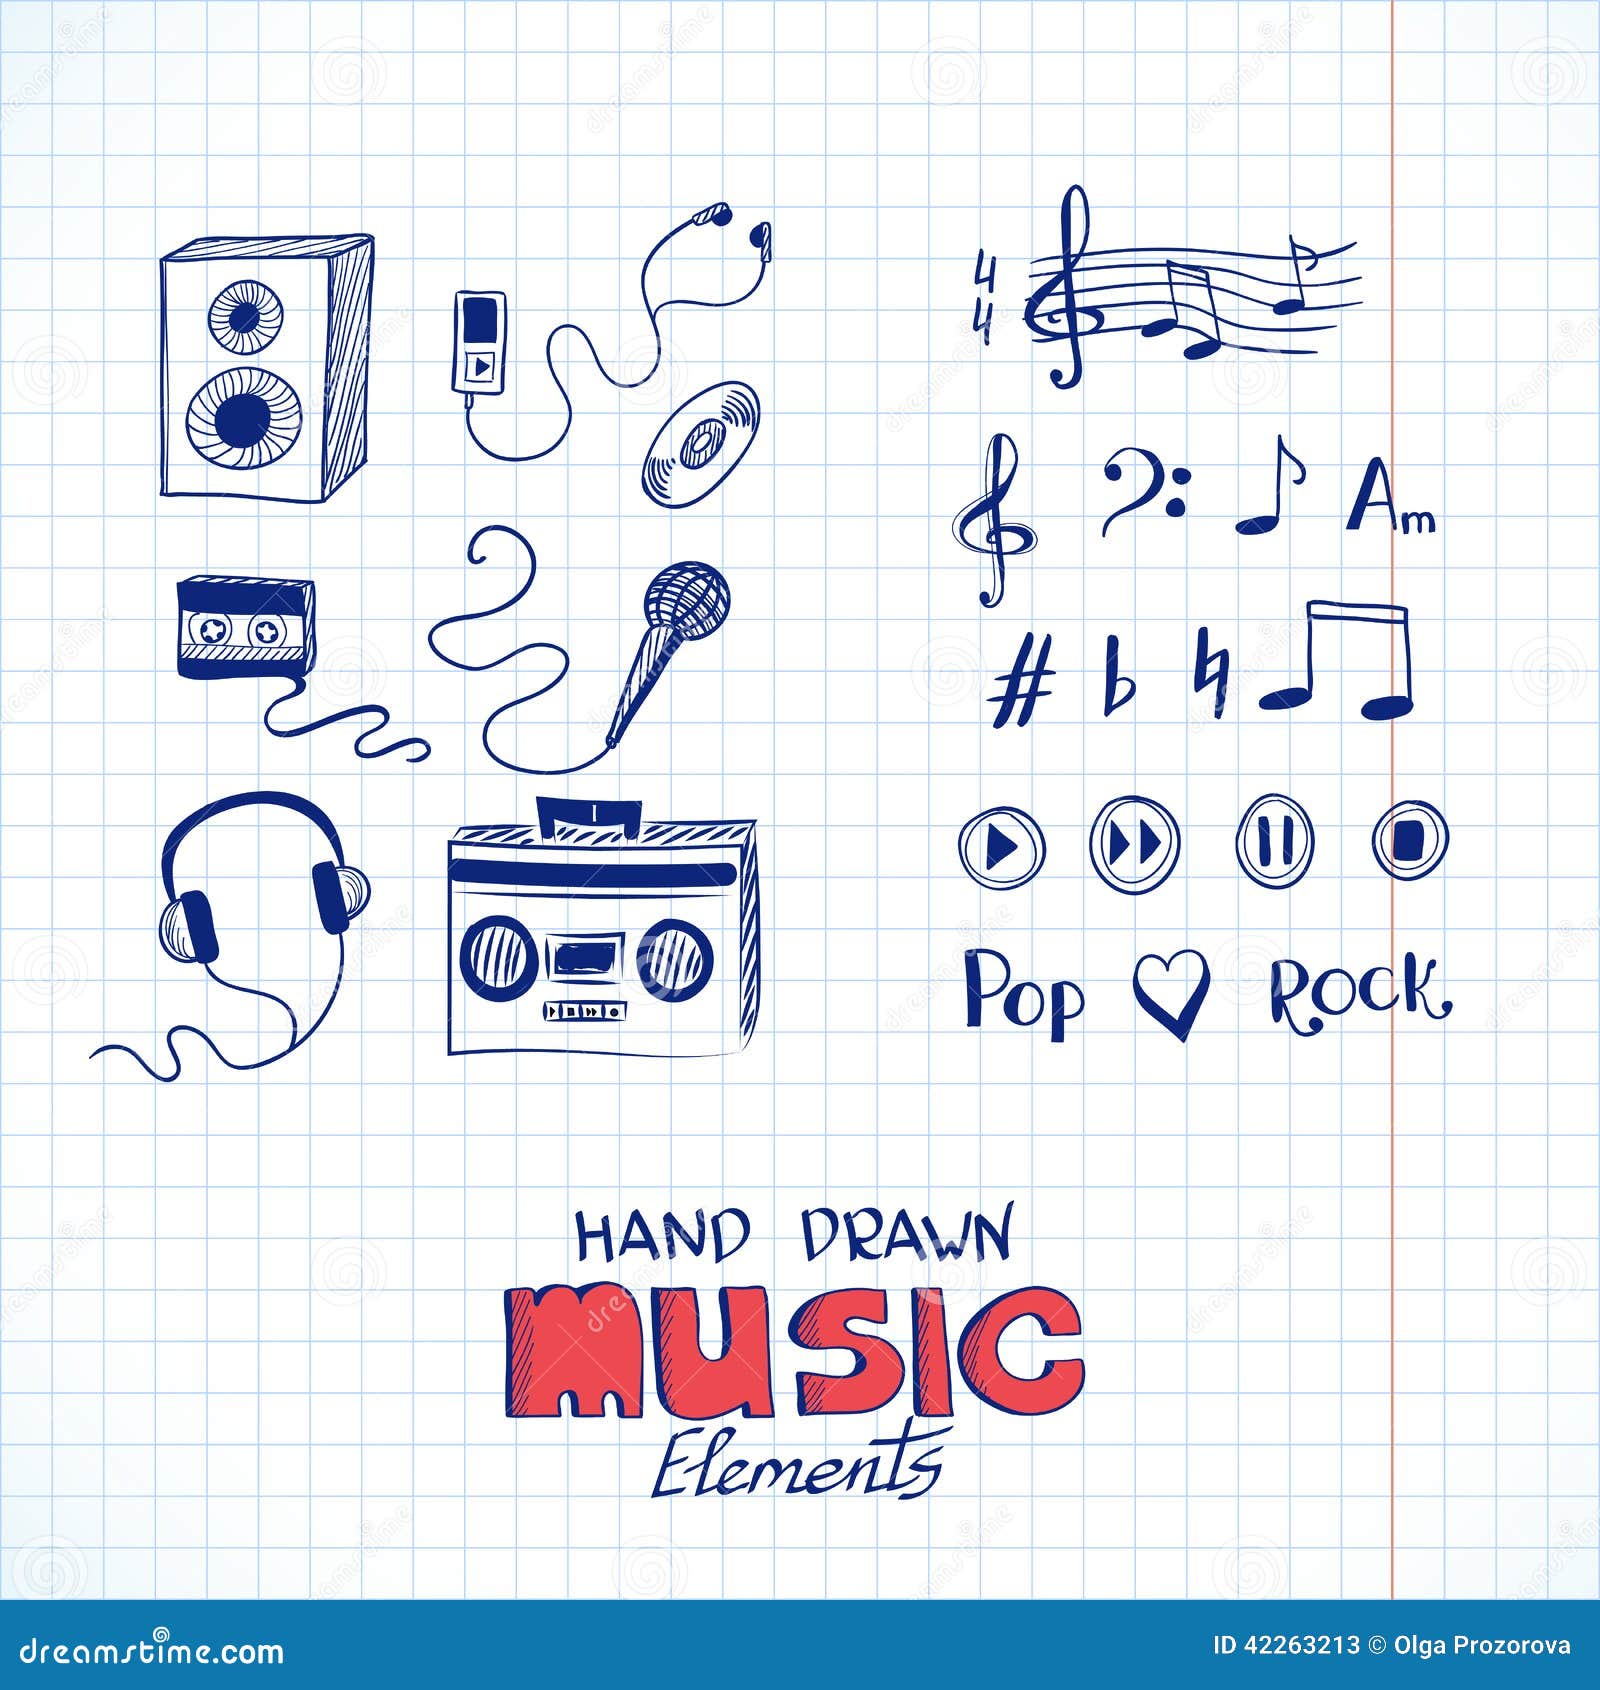 Sketch of music elements stock vector. Illustration of song - 42263213